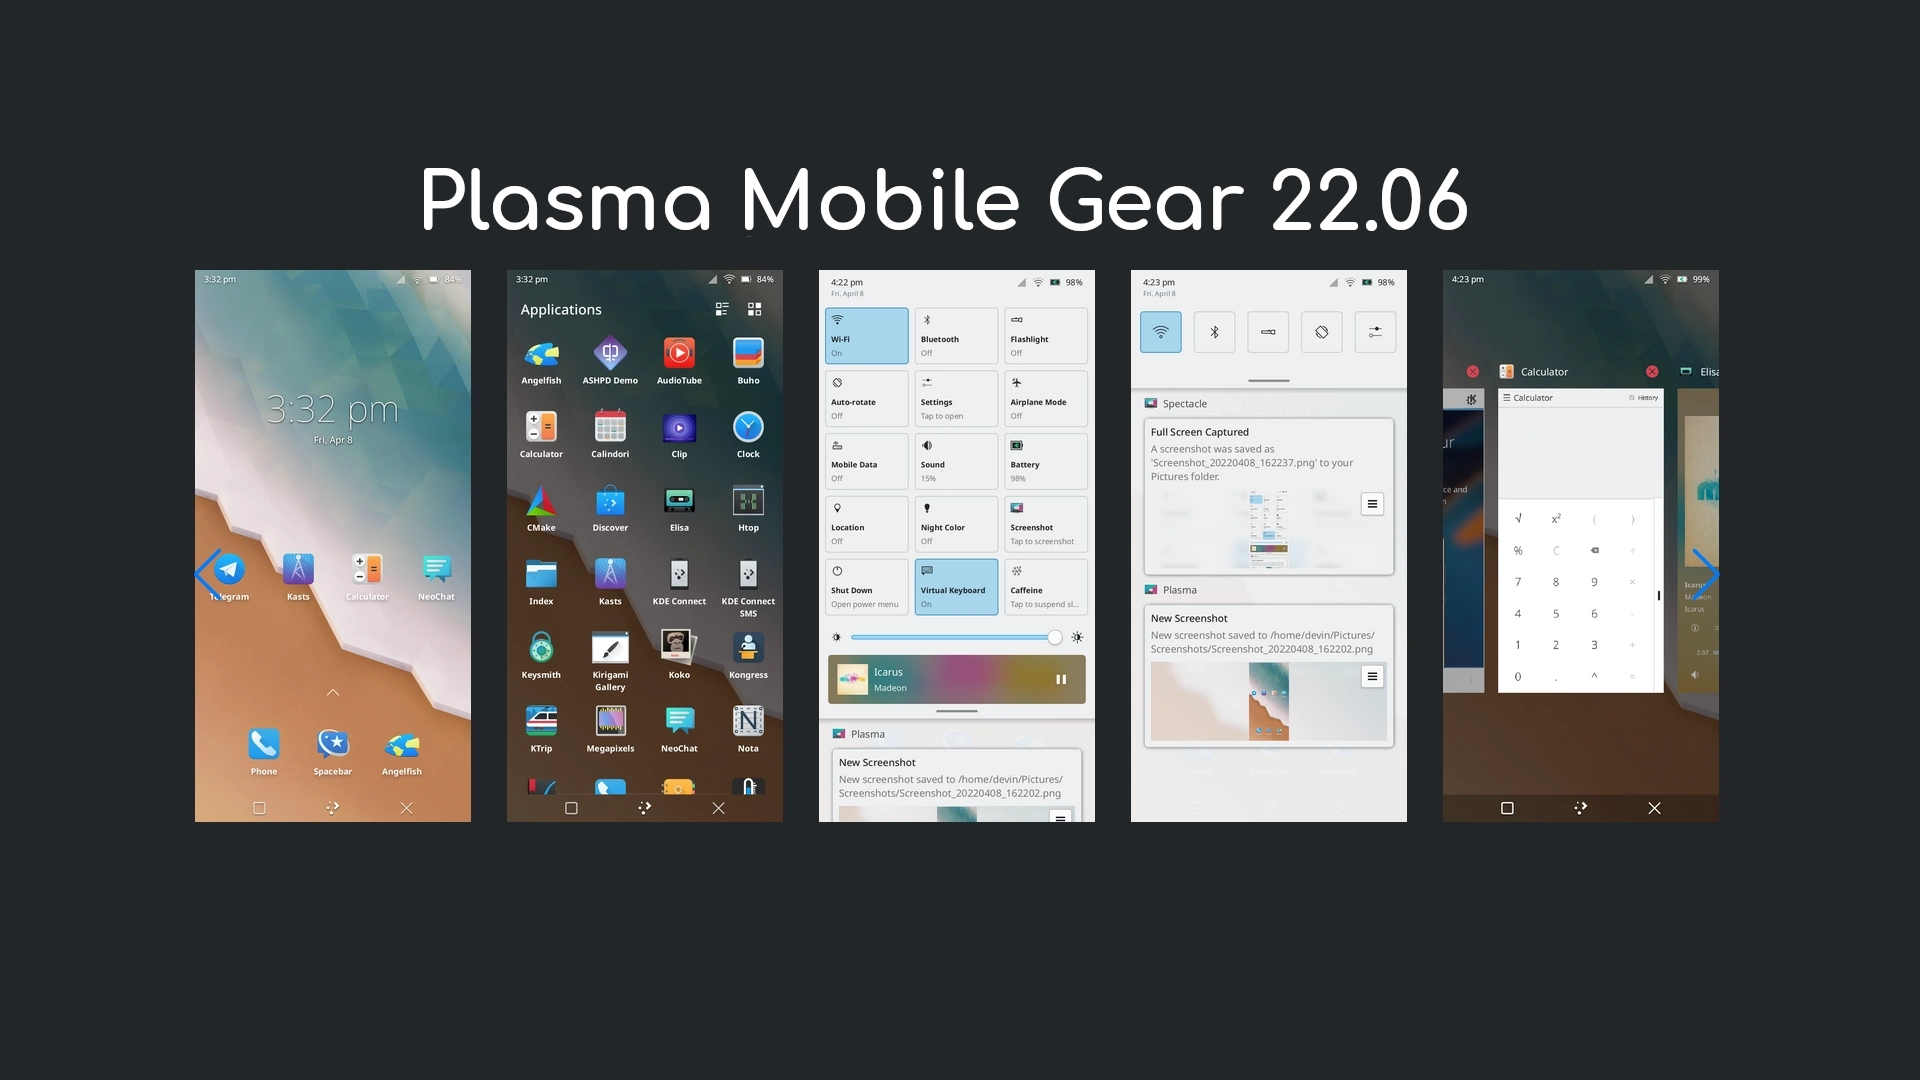 KDE releases Plasma Mobile Gear 22.06 for Linux phones, here’s what’s new